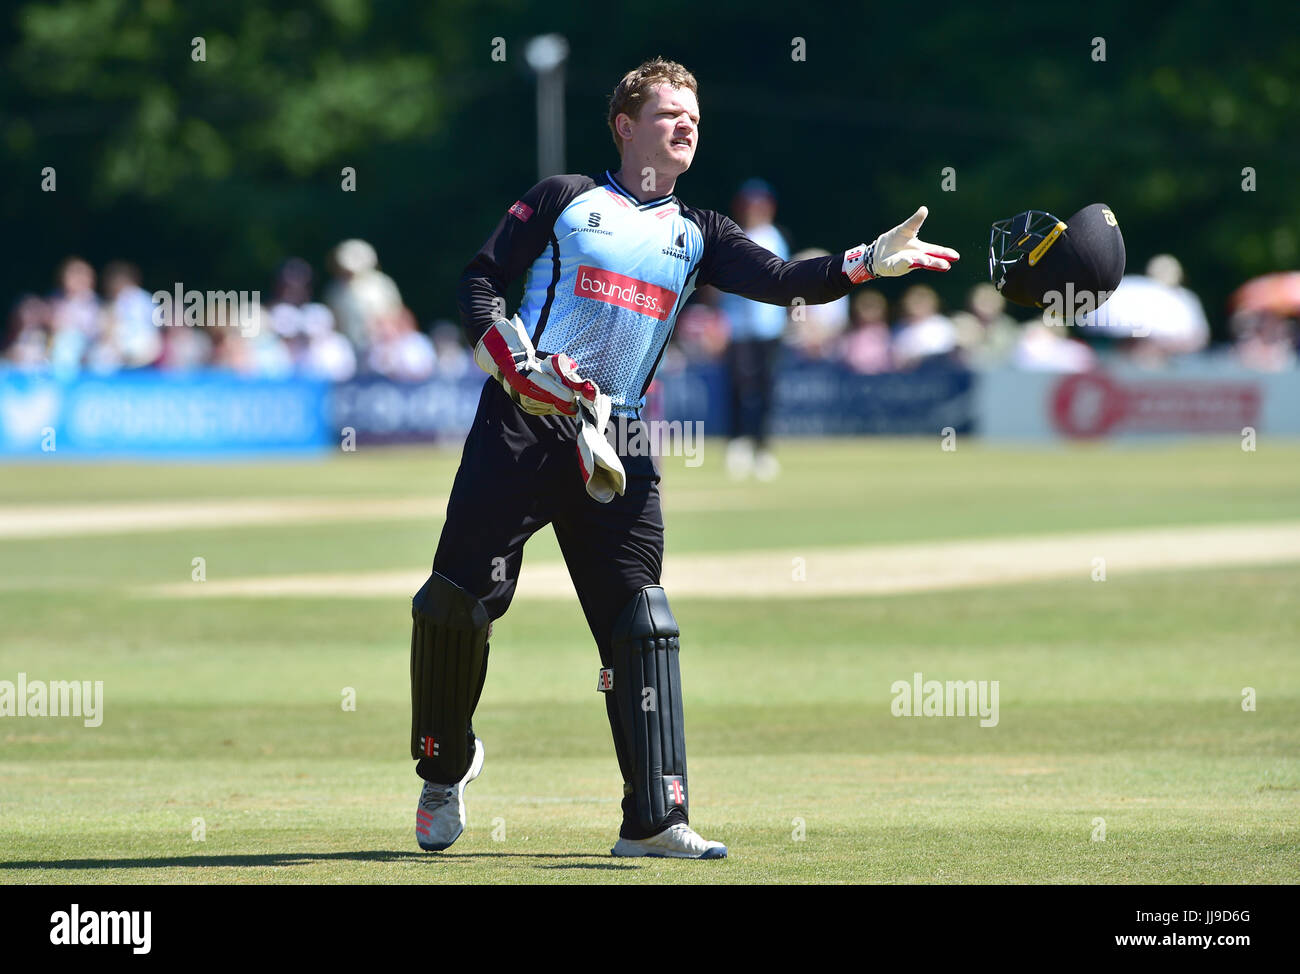 Wicketkeeper Ben Brown of Sussex Sharks v Glamorgan in the NatWest T20 blast match at the Arundel Castle ground in West Sussex UK Sunday 9th July 2017 Photograph taken by Simon Dack Stock Photo